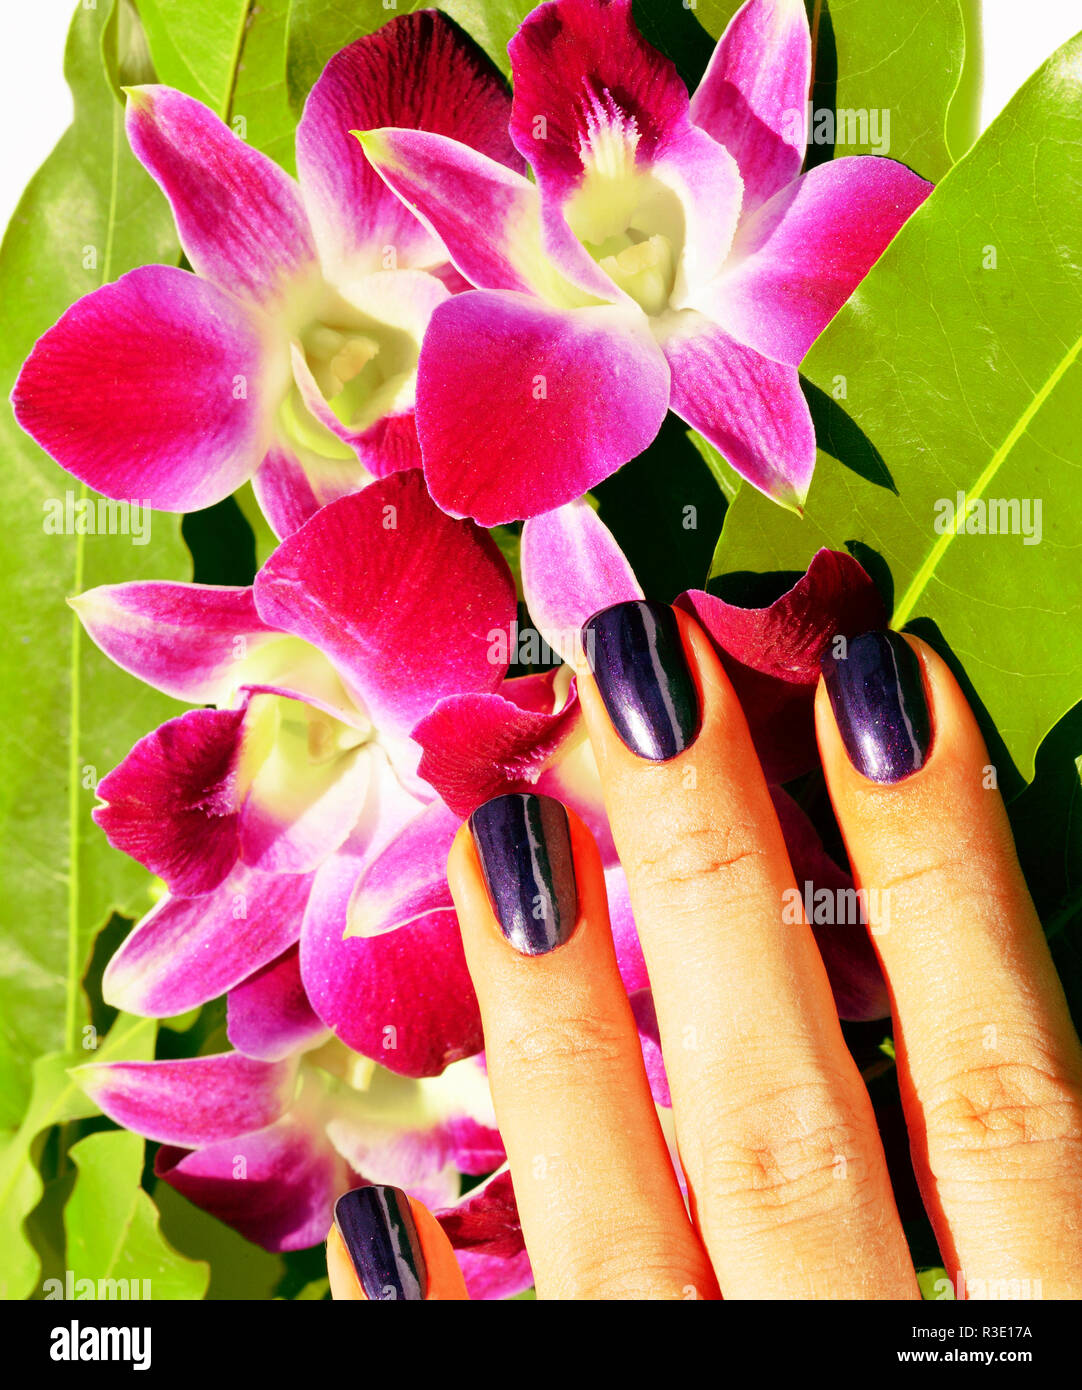 bright colored photo of fingernails with manicure and orchids ma Stock Photo